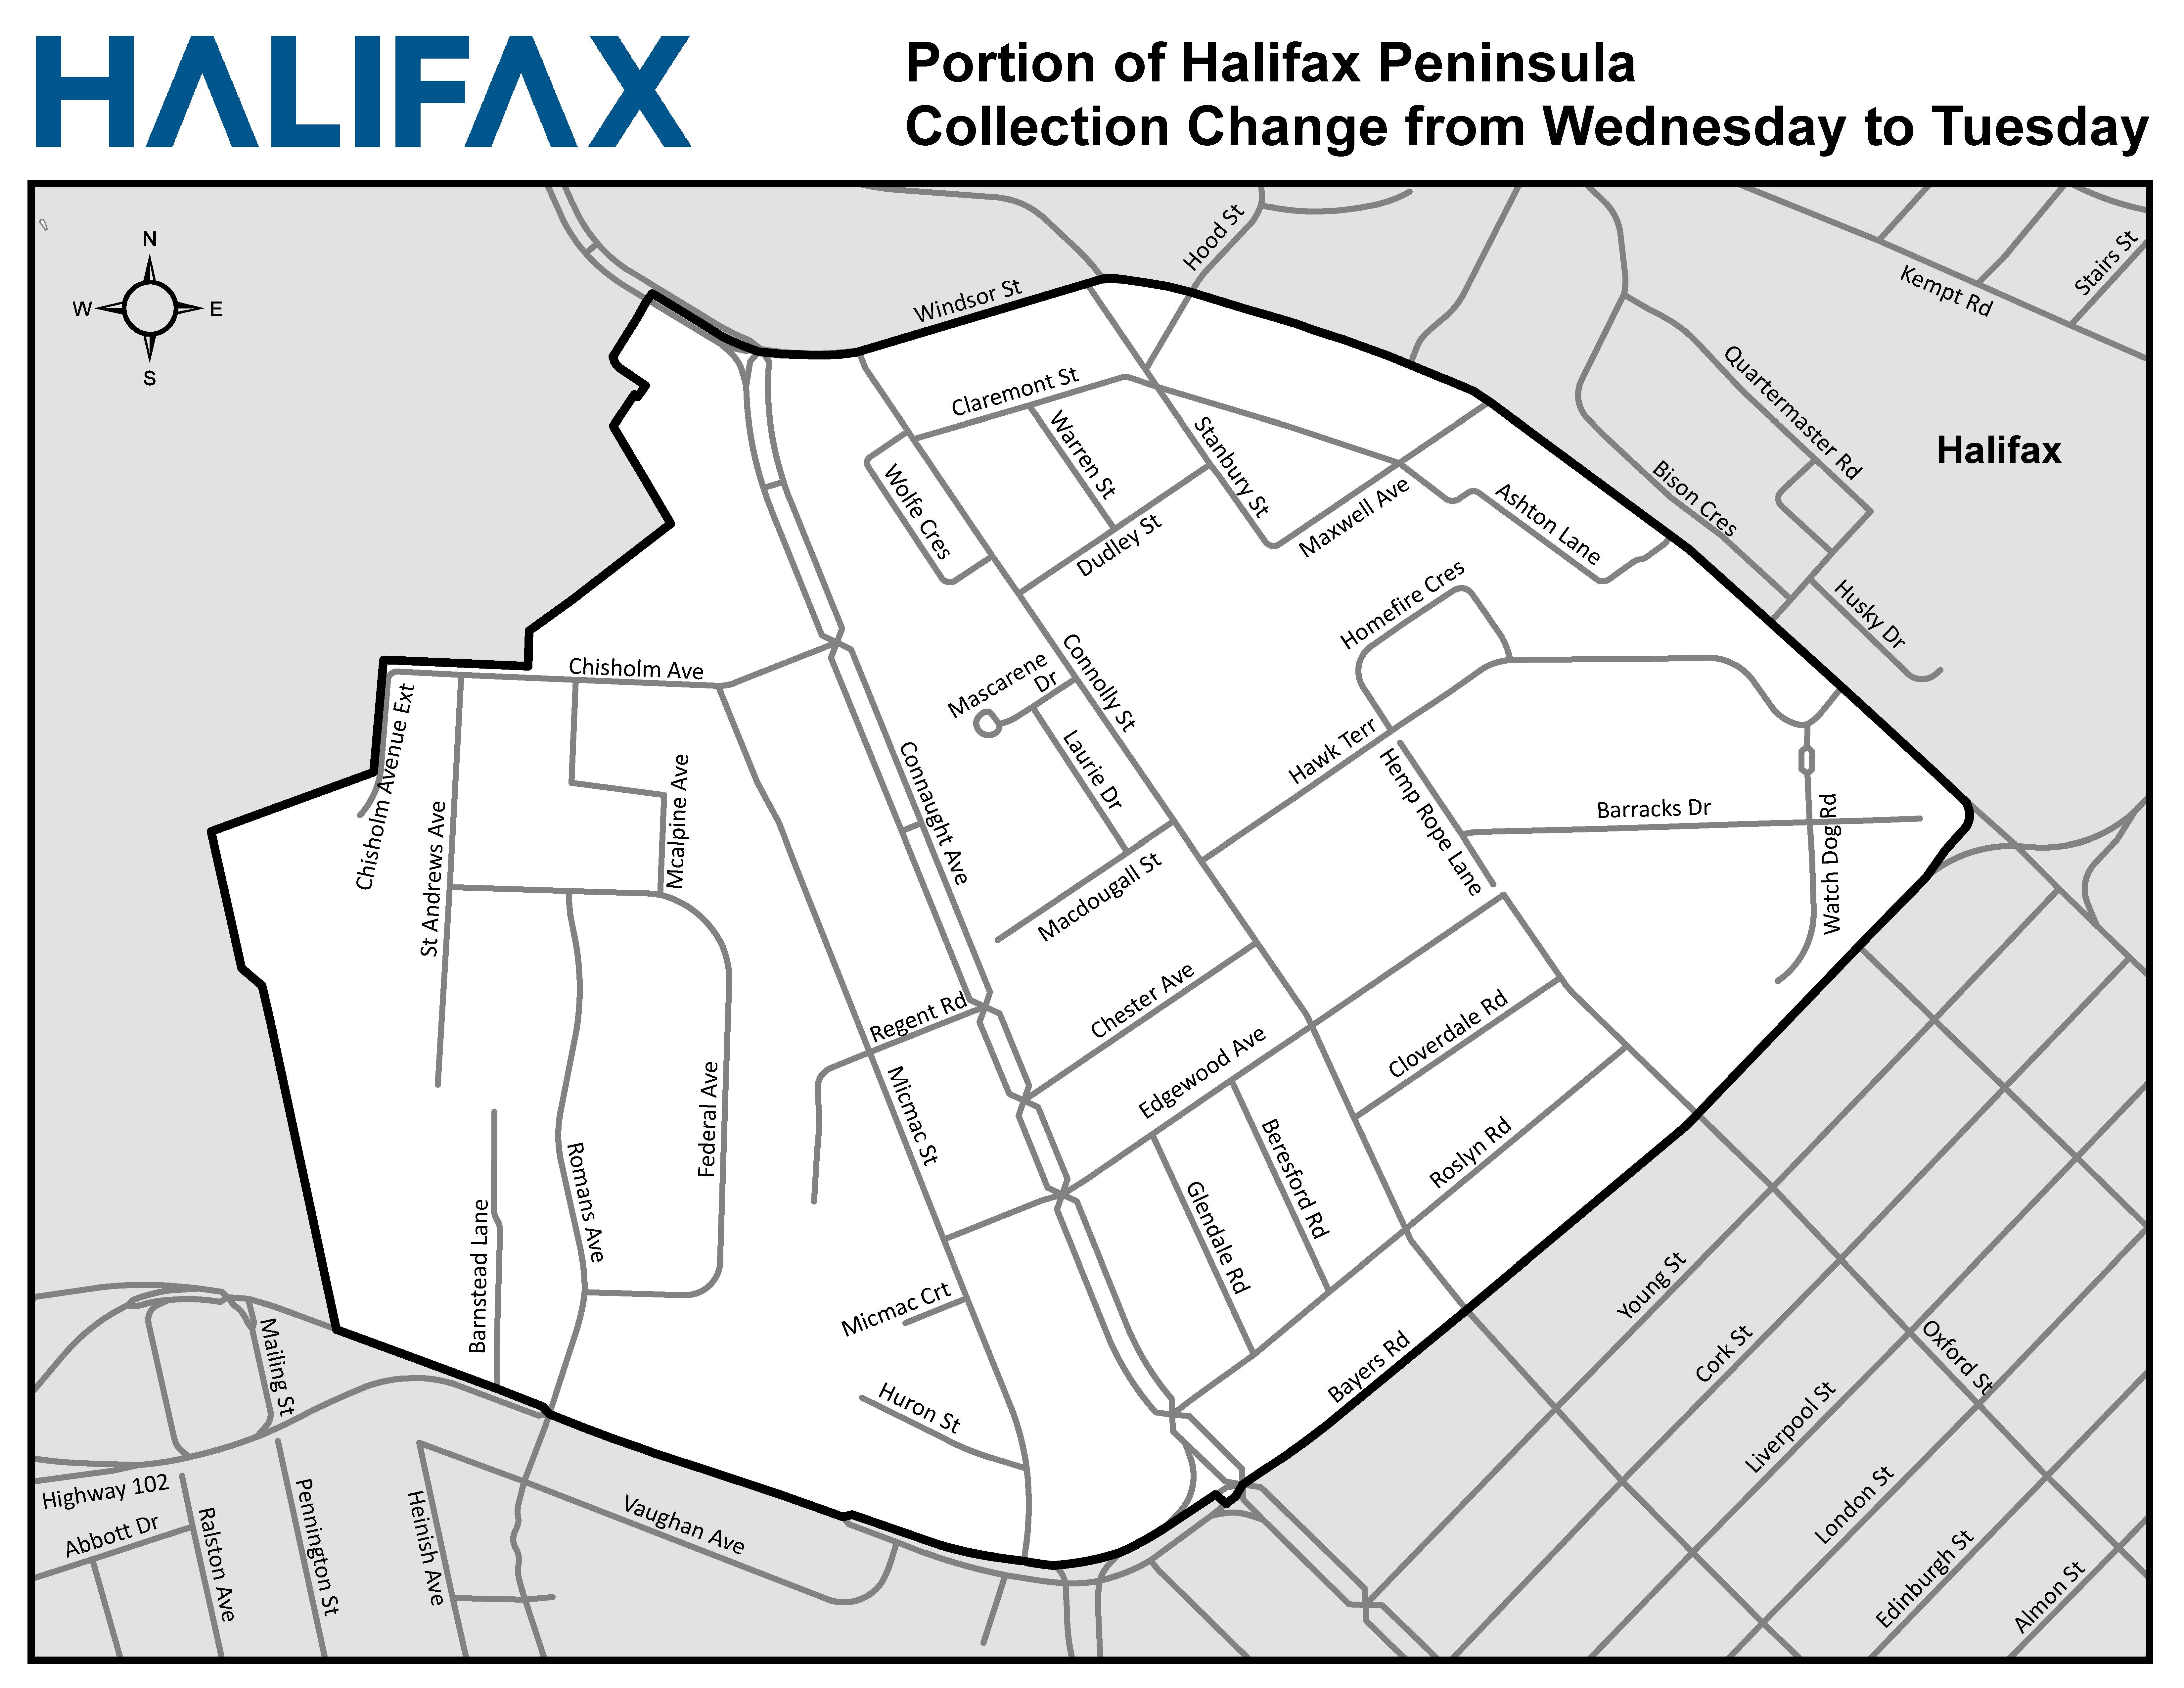 Portion of Halifax Peninsula Area Collection Change from Wednesday to Tuesday (unshaded)